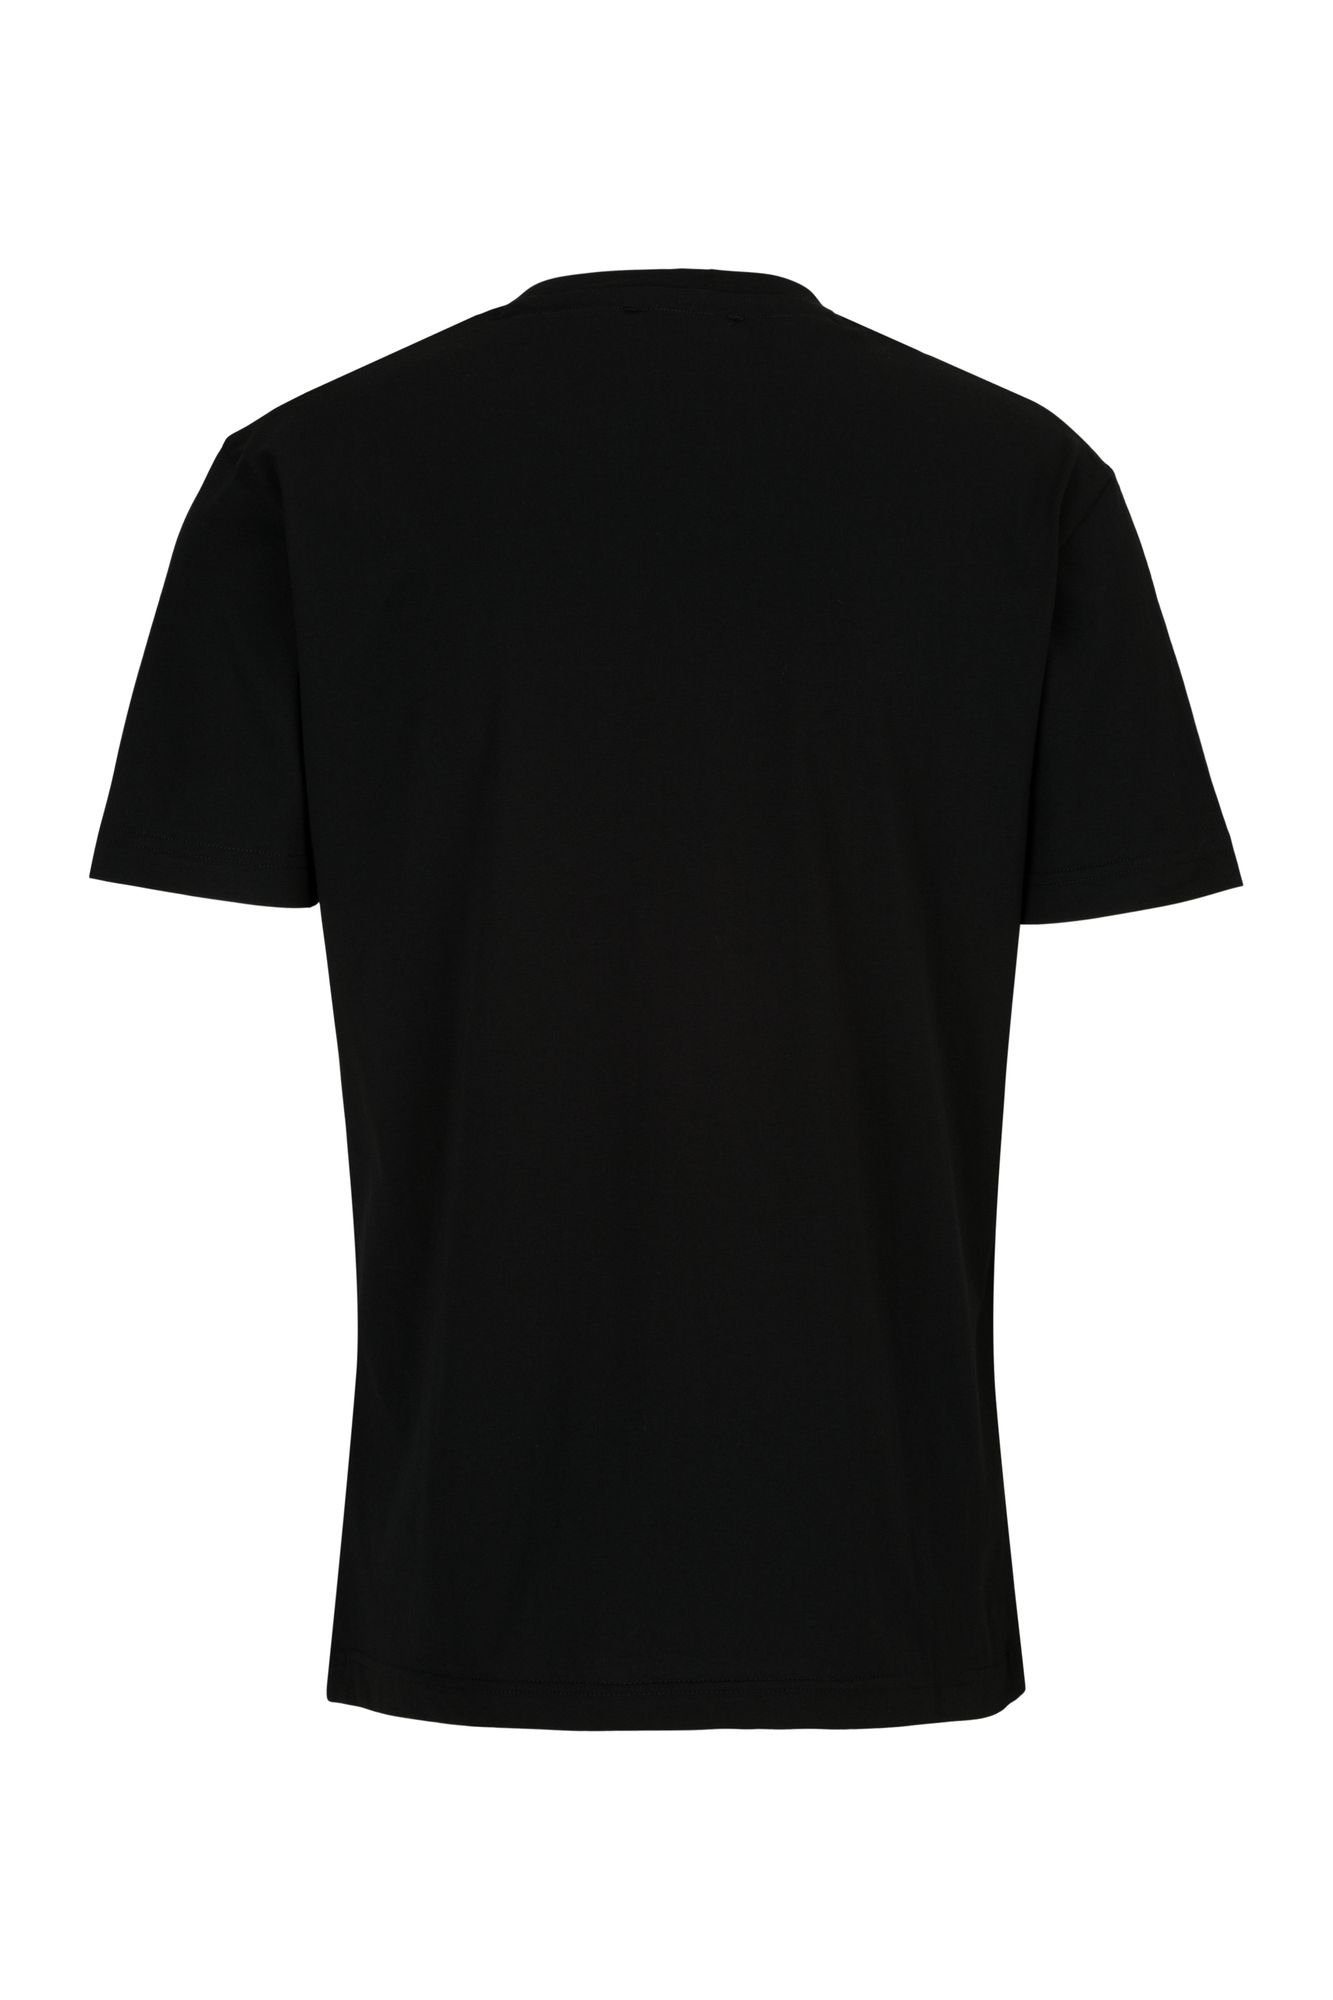 BLACK 19V69 T-Shirt Italia Injection Versace by